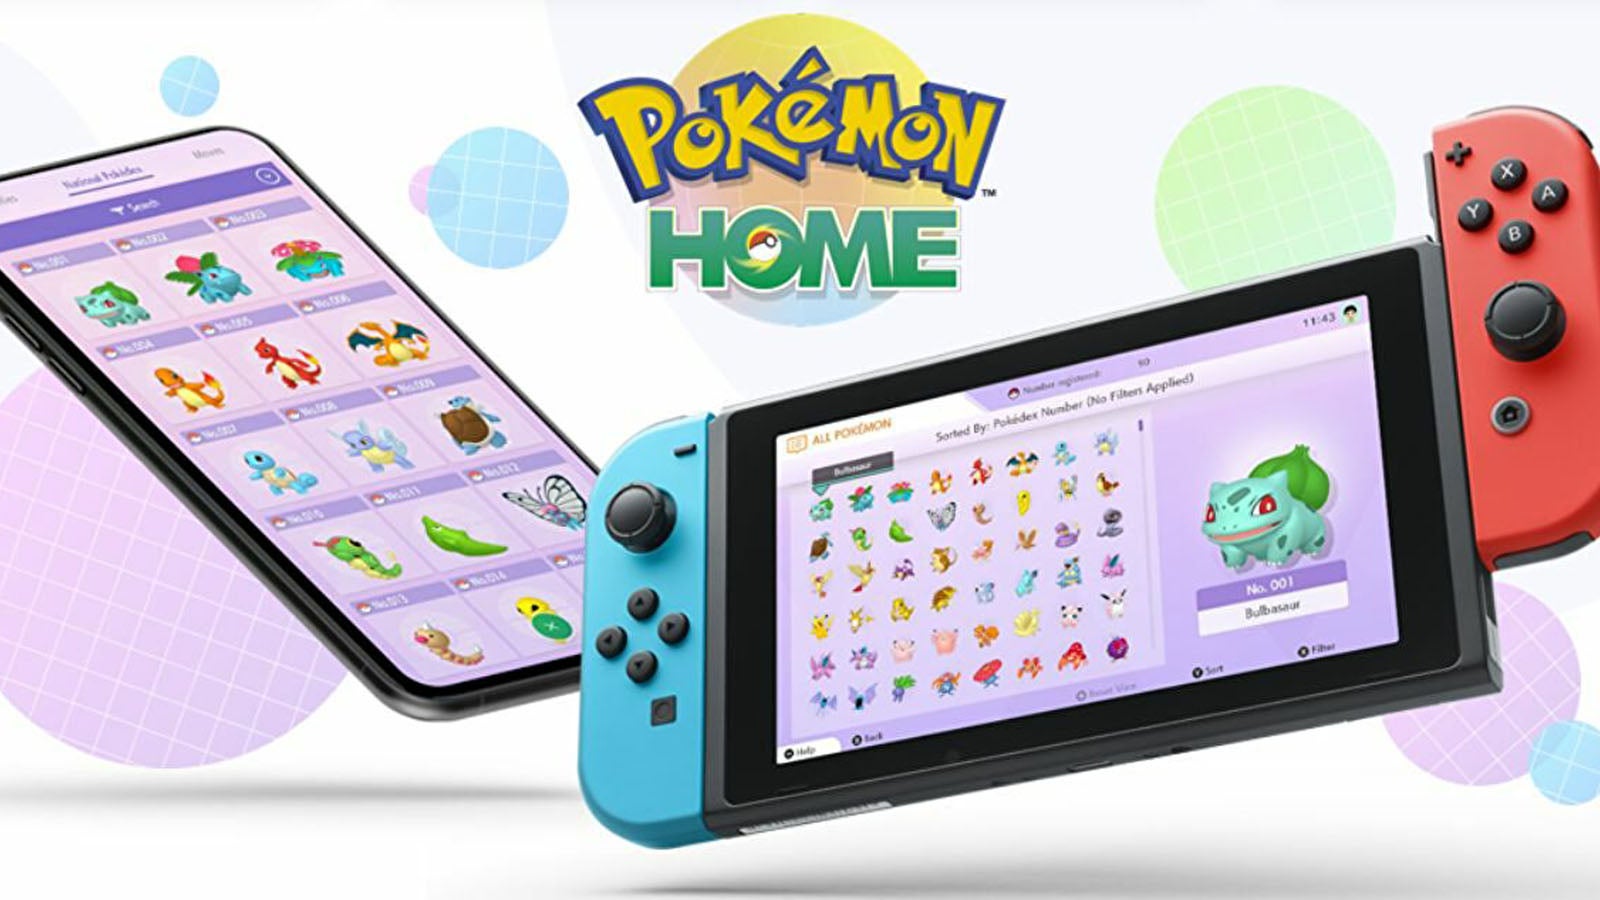 Image for Pokémon Home version 2.0 compatible Bad puns and video games since 1999., free vs premium features and price explained